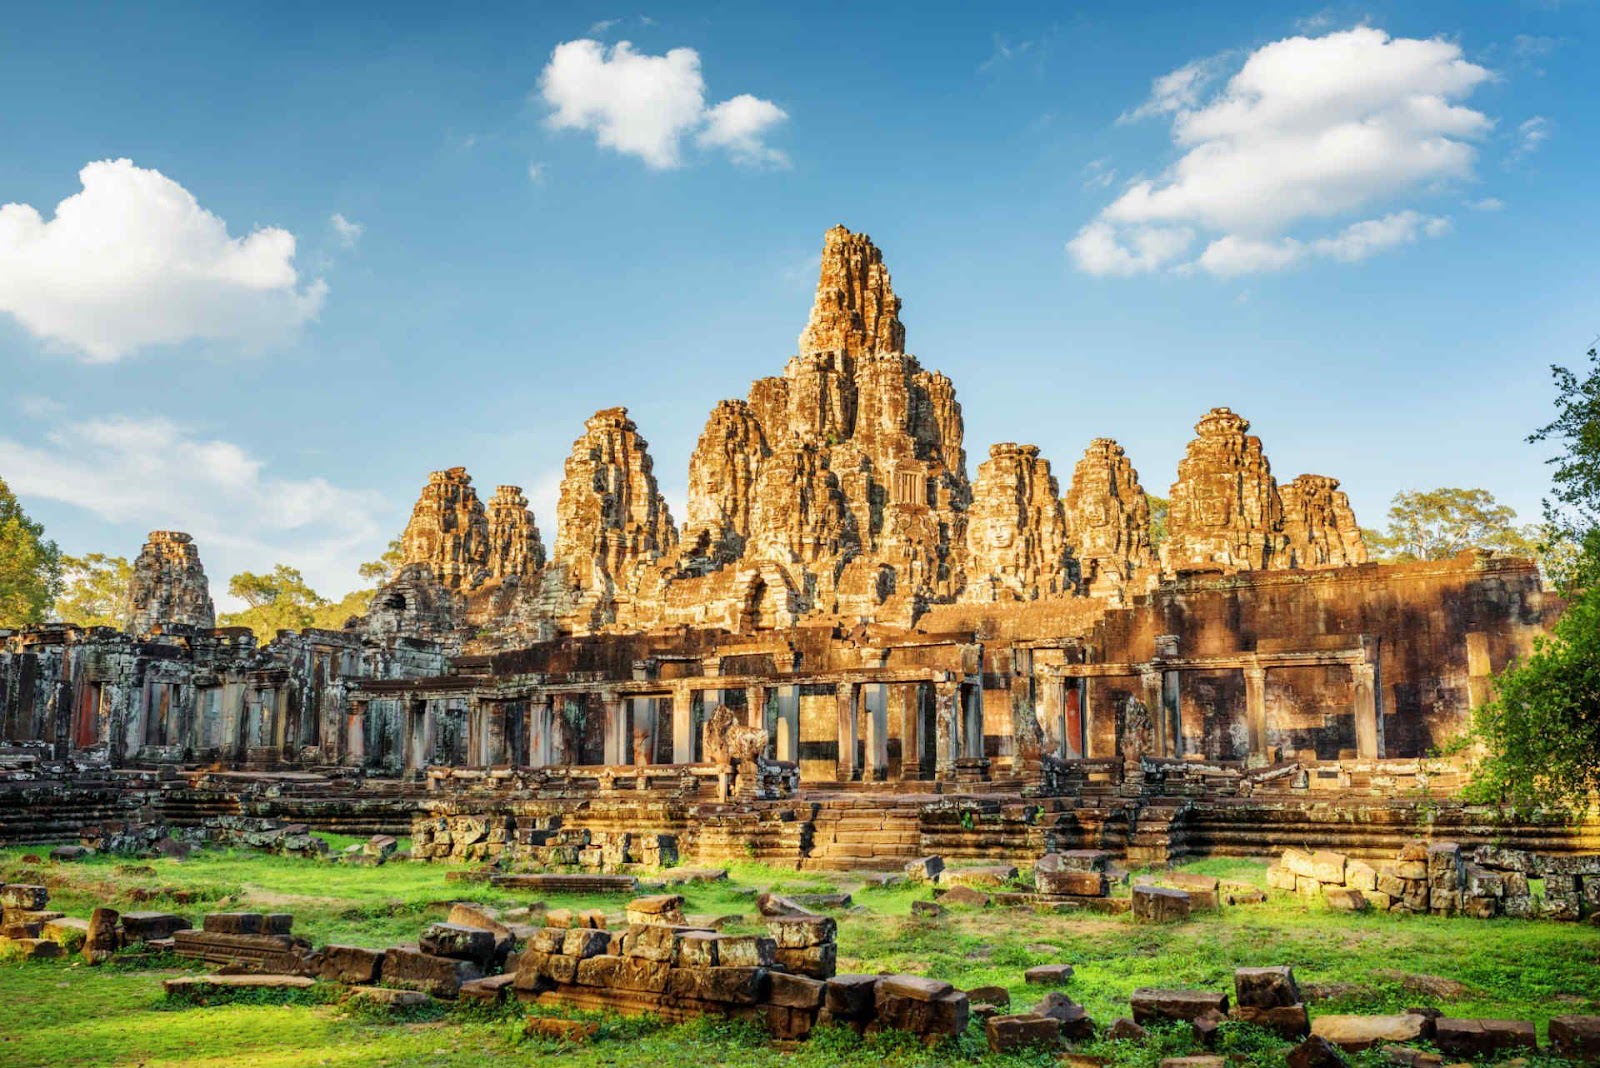 The most beautiful season to travel to Cambodia